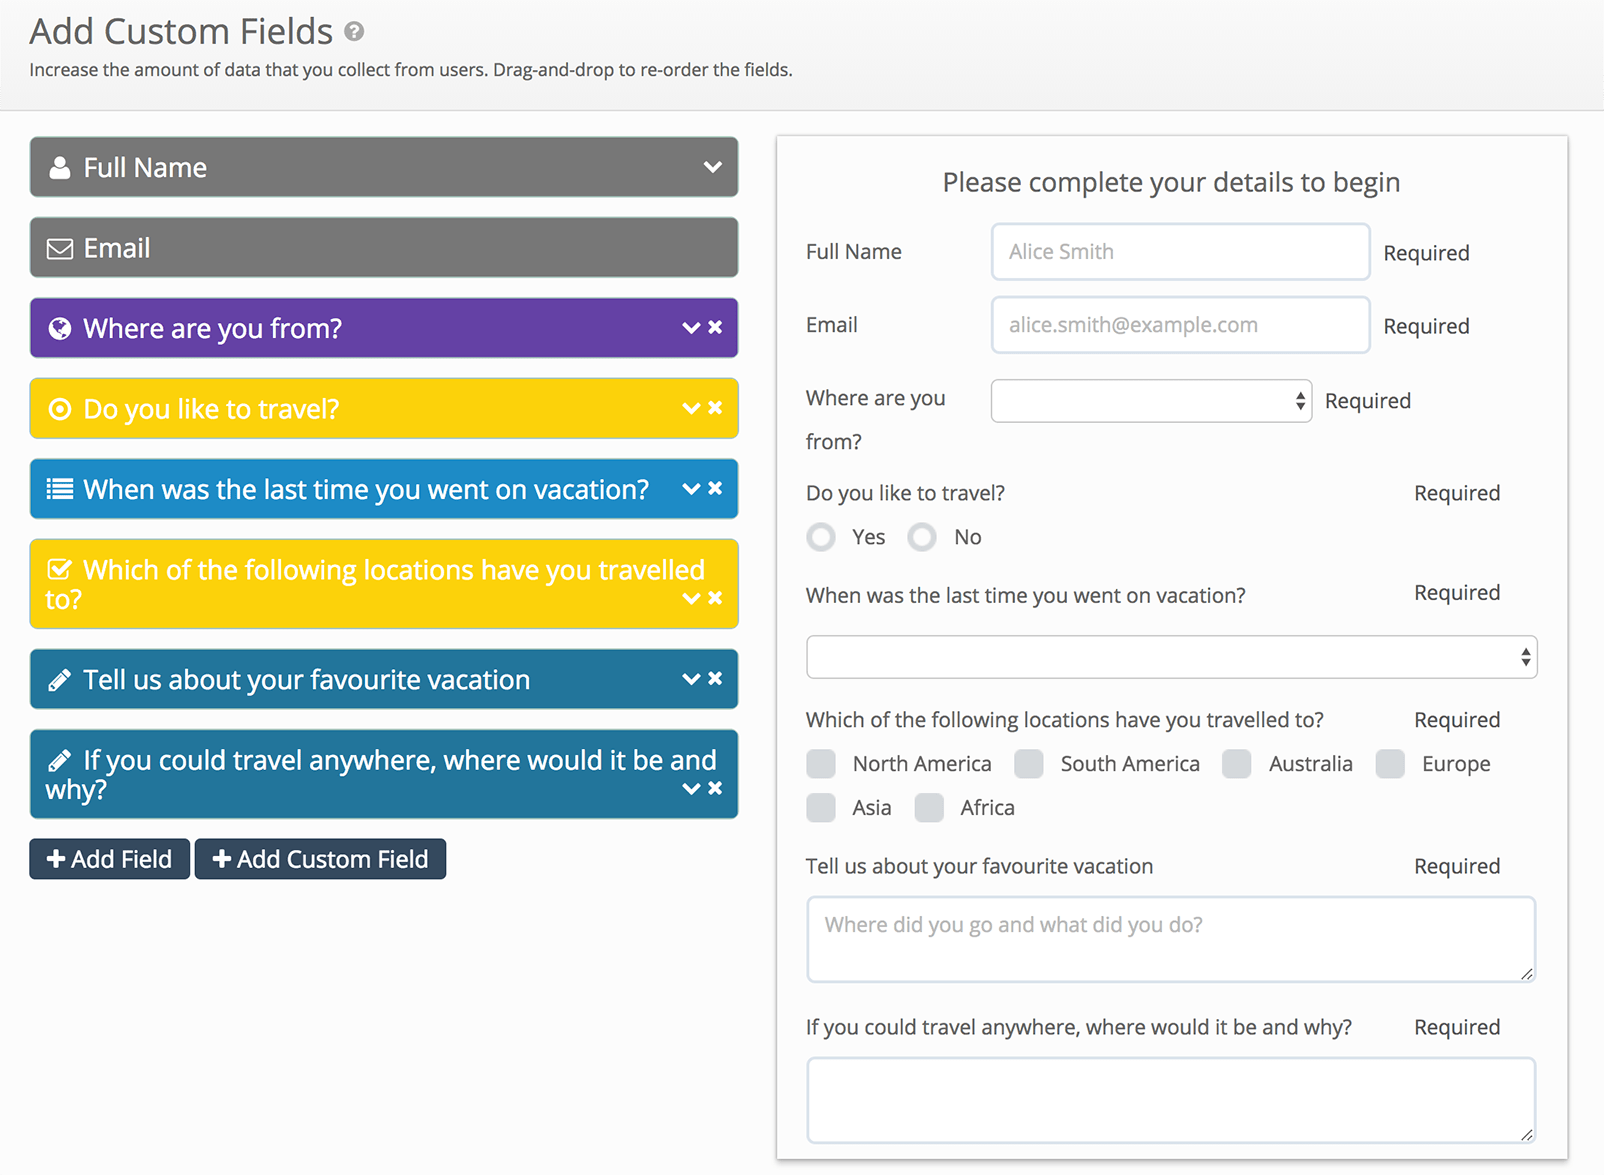 Set up a survey with the Custom Fields form